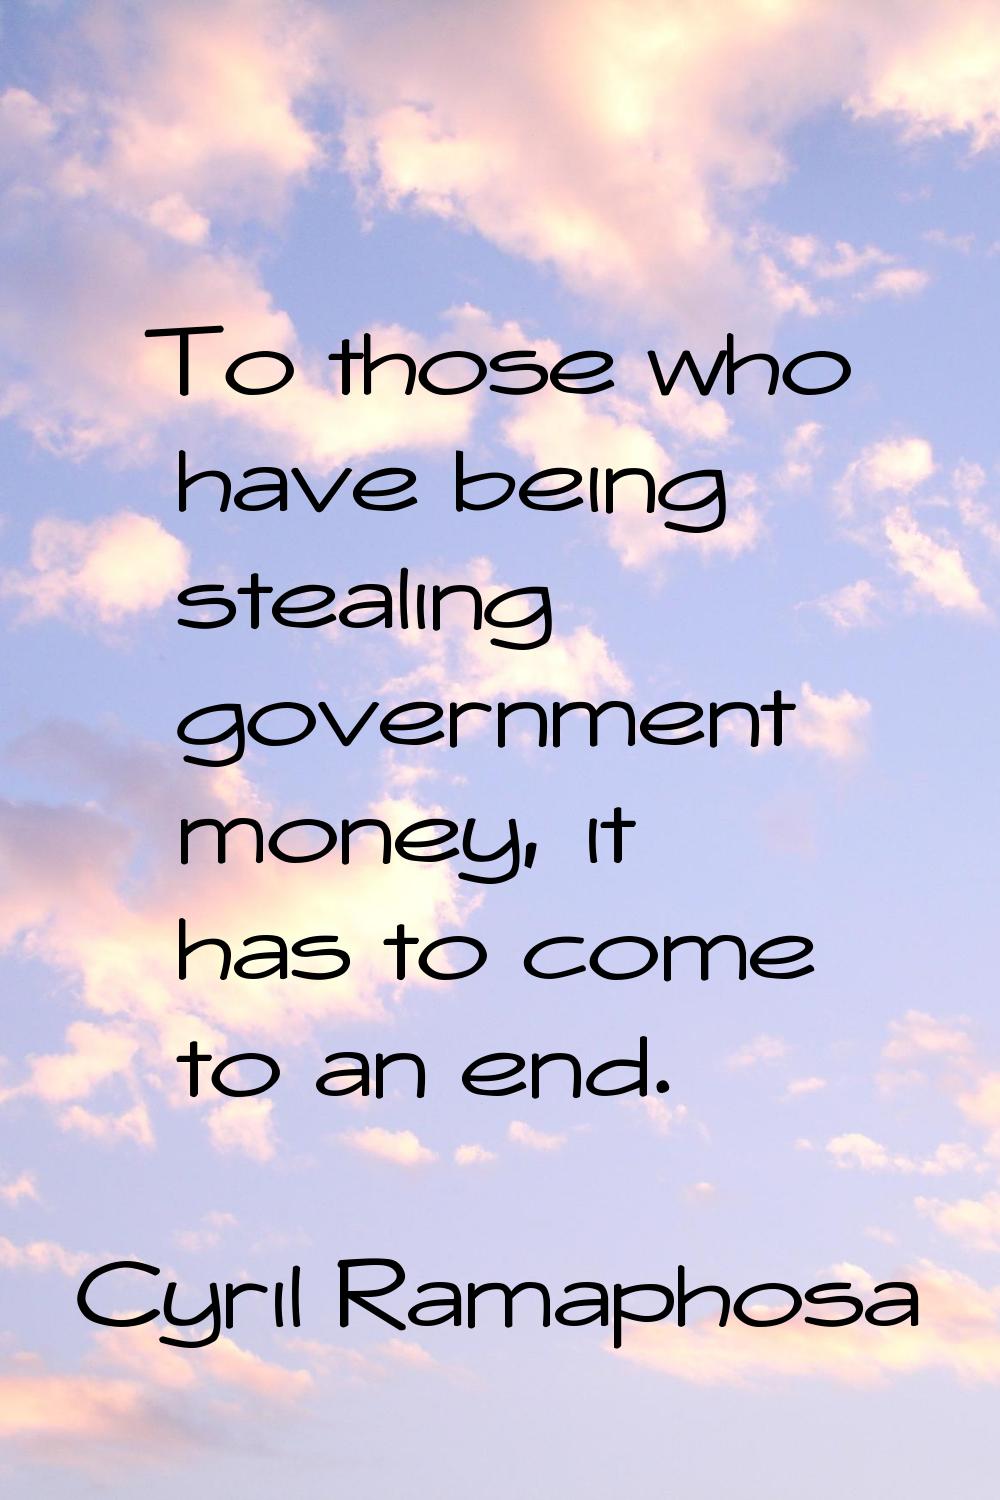 To those who have being stealing government money, it has to come to an end.